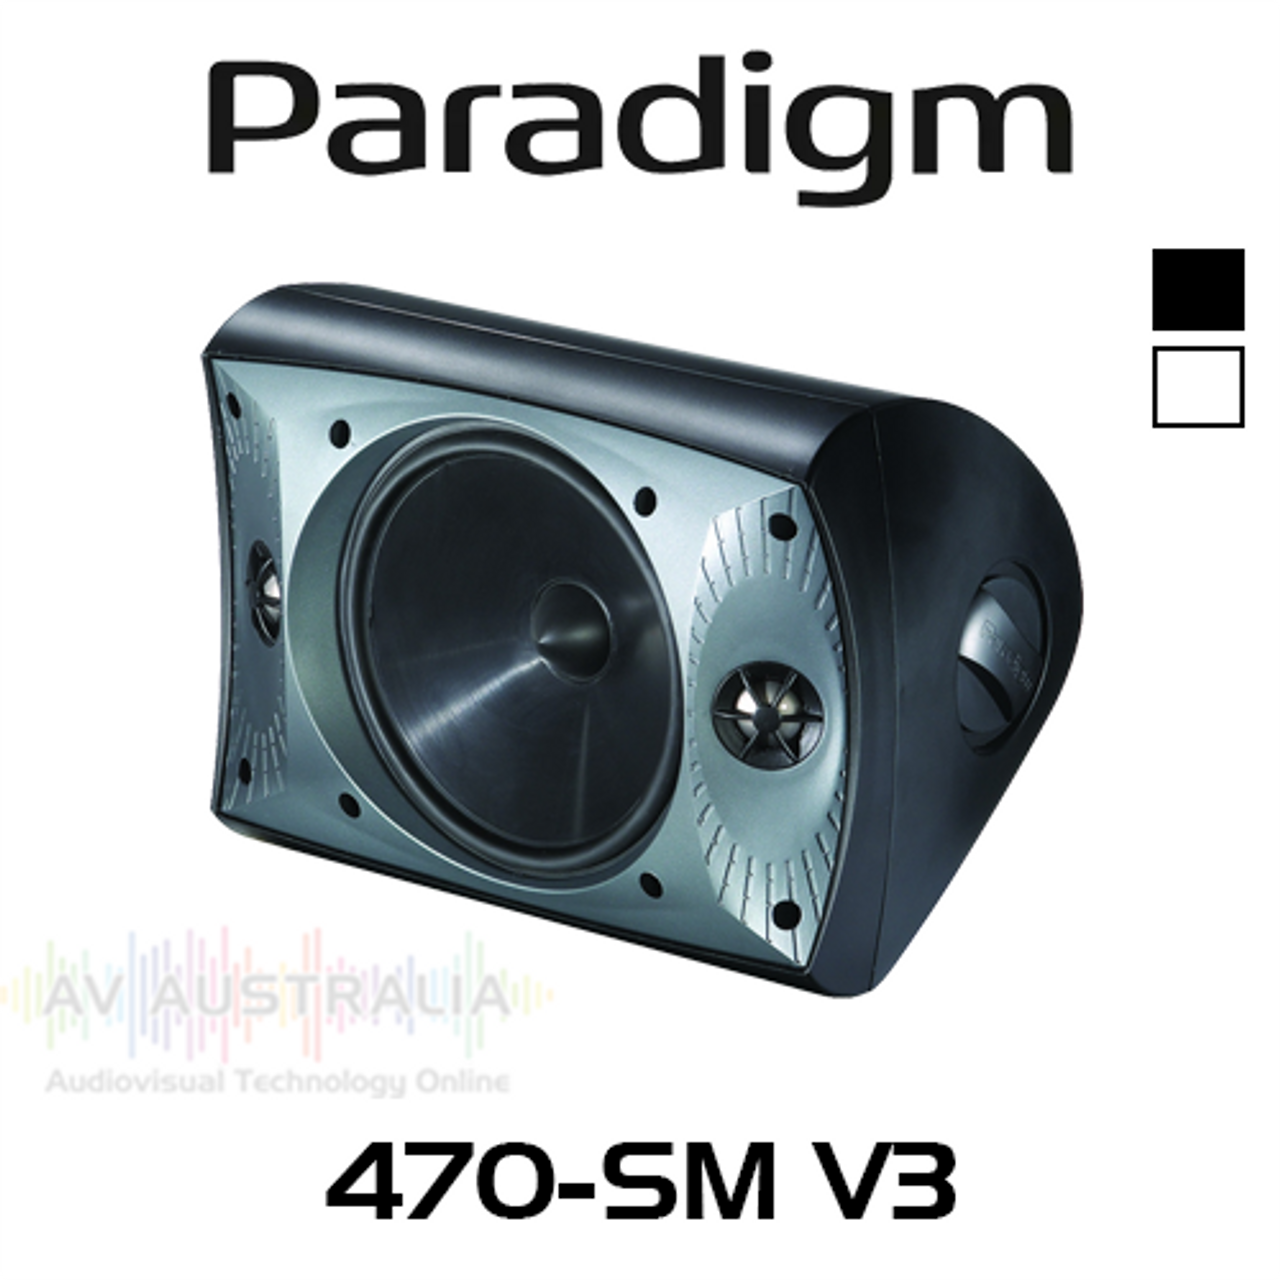 Paradigm 470-SM V3 7.5" All Weather UV-resistant PolyGlass Sealed Stereo Outdoor Speaker (Each)